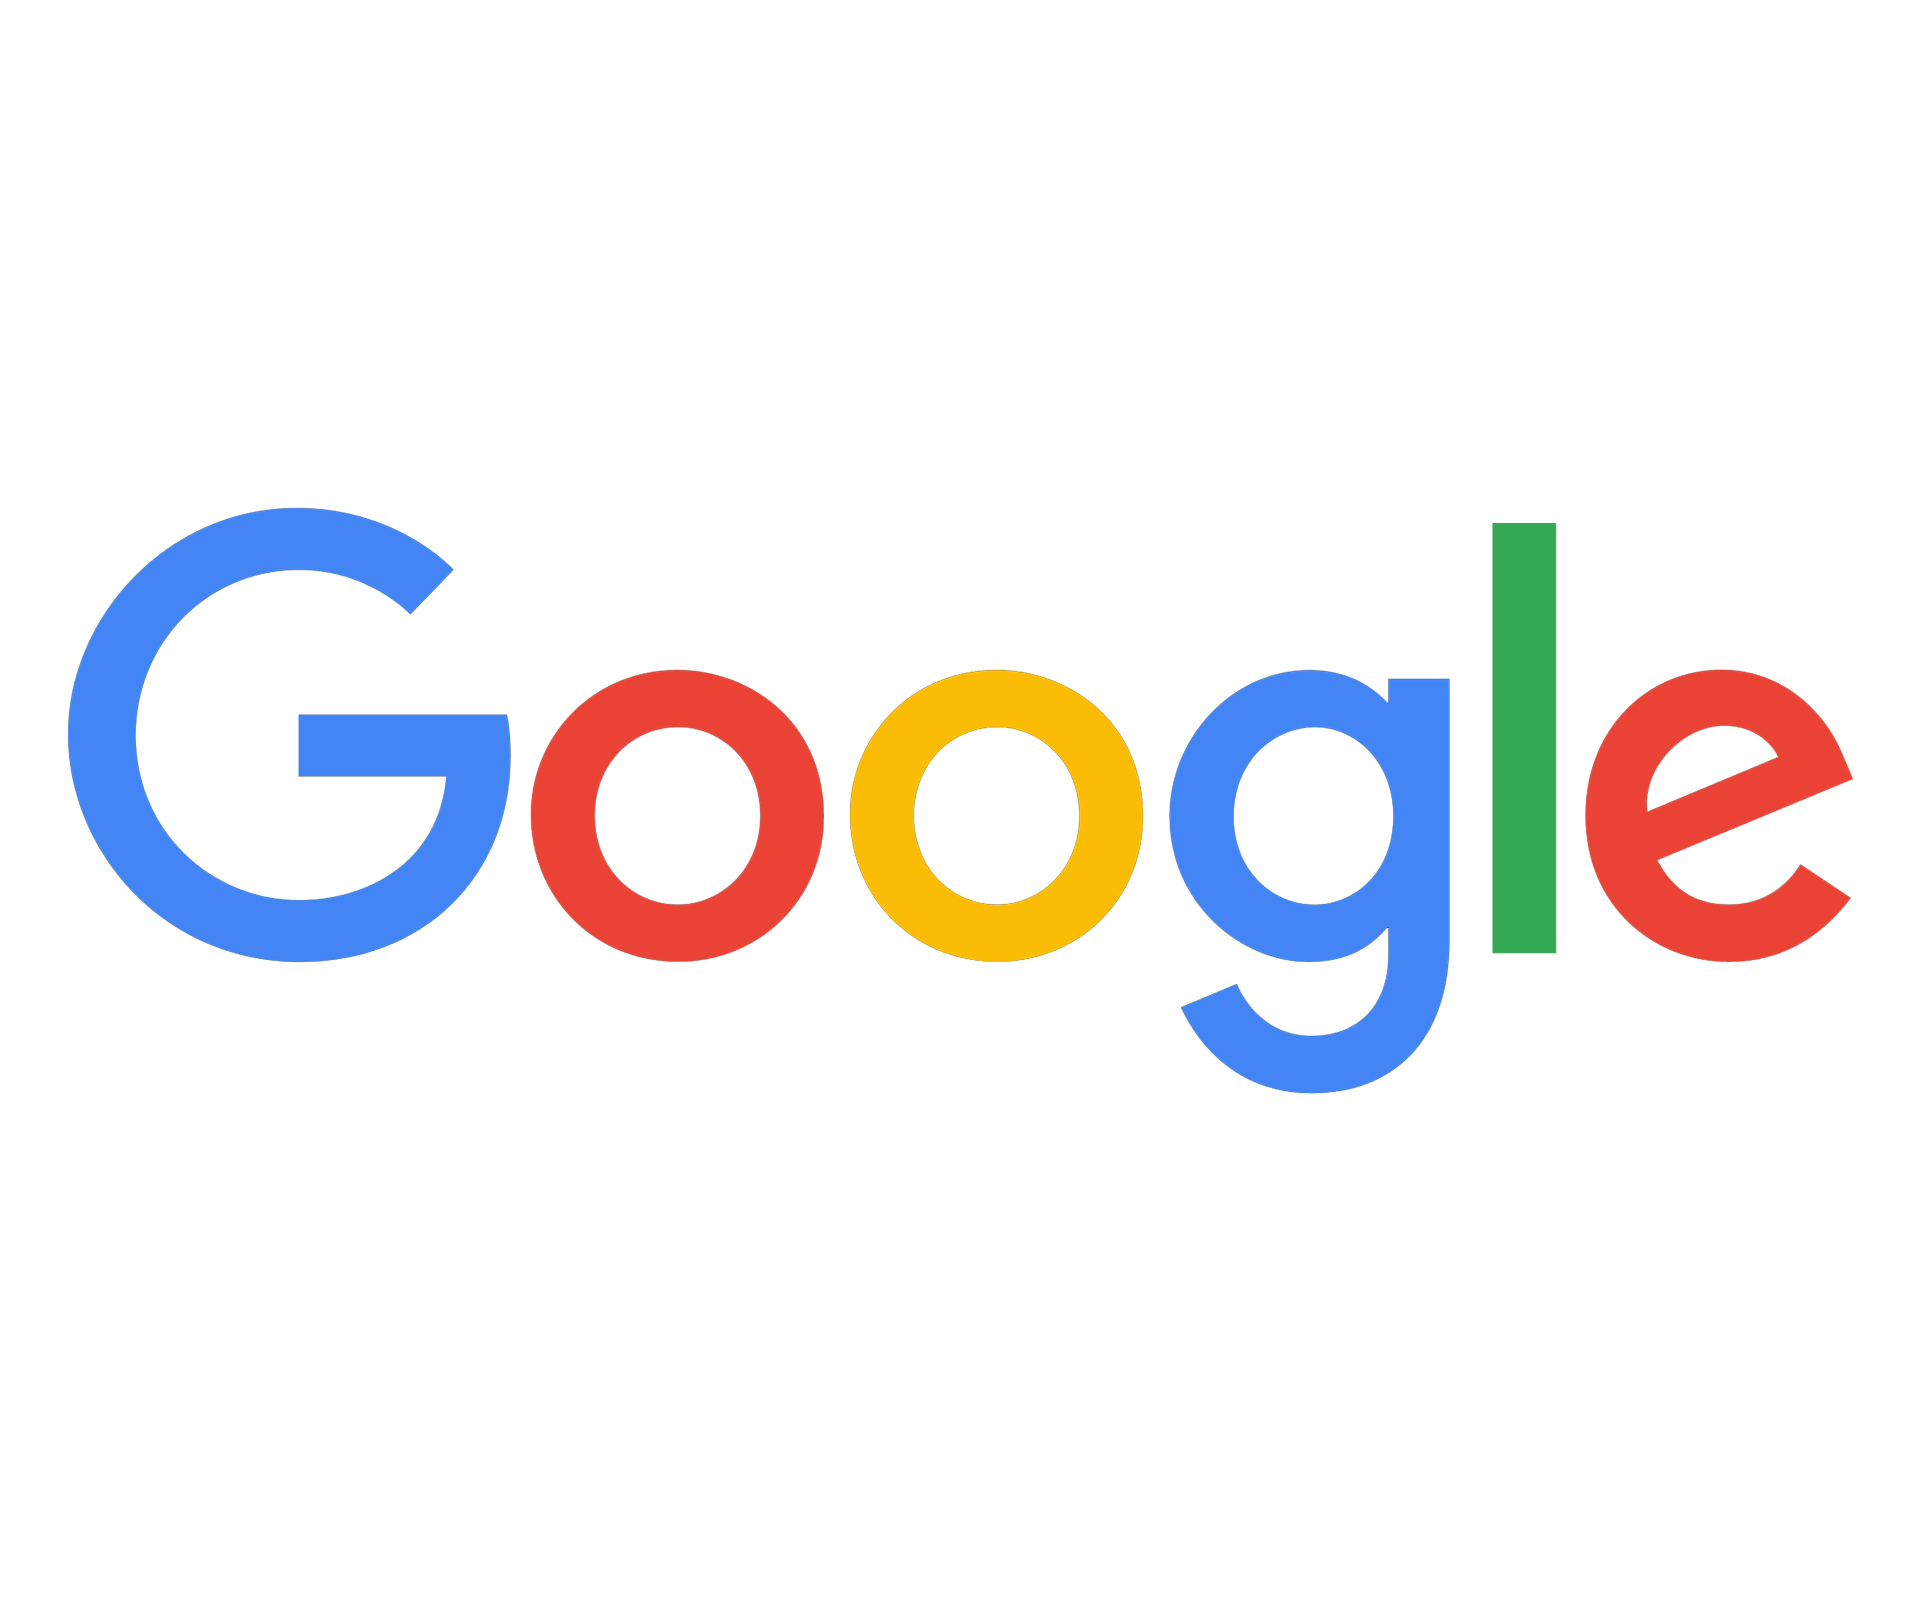 Google releases most popular search terms of 2015